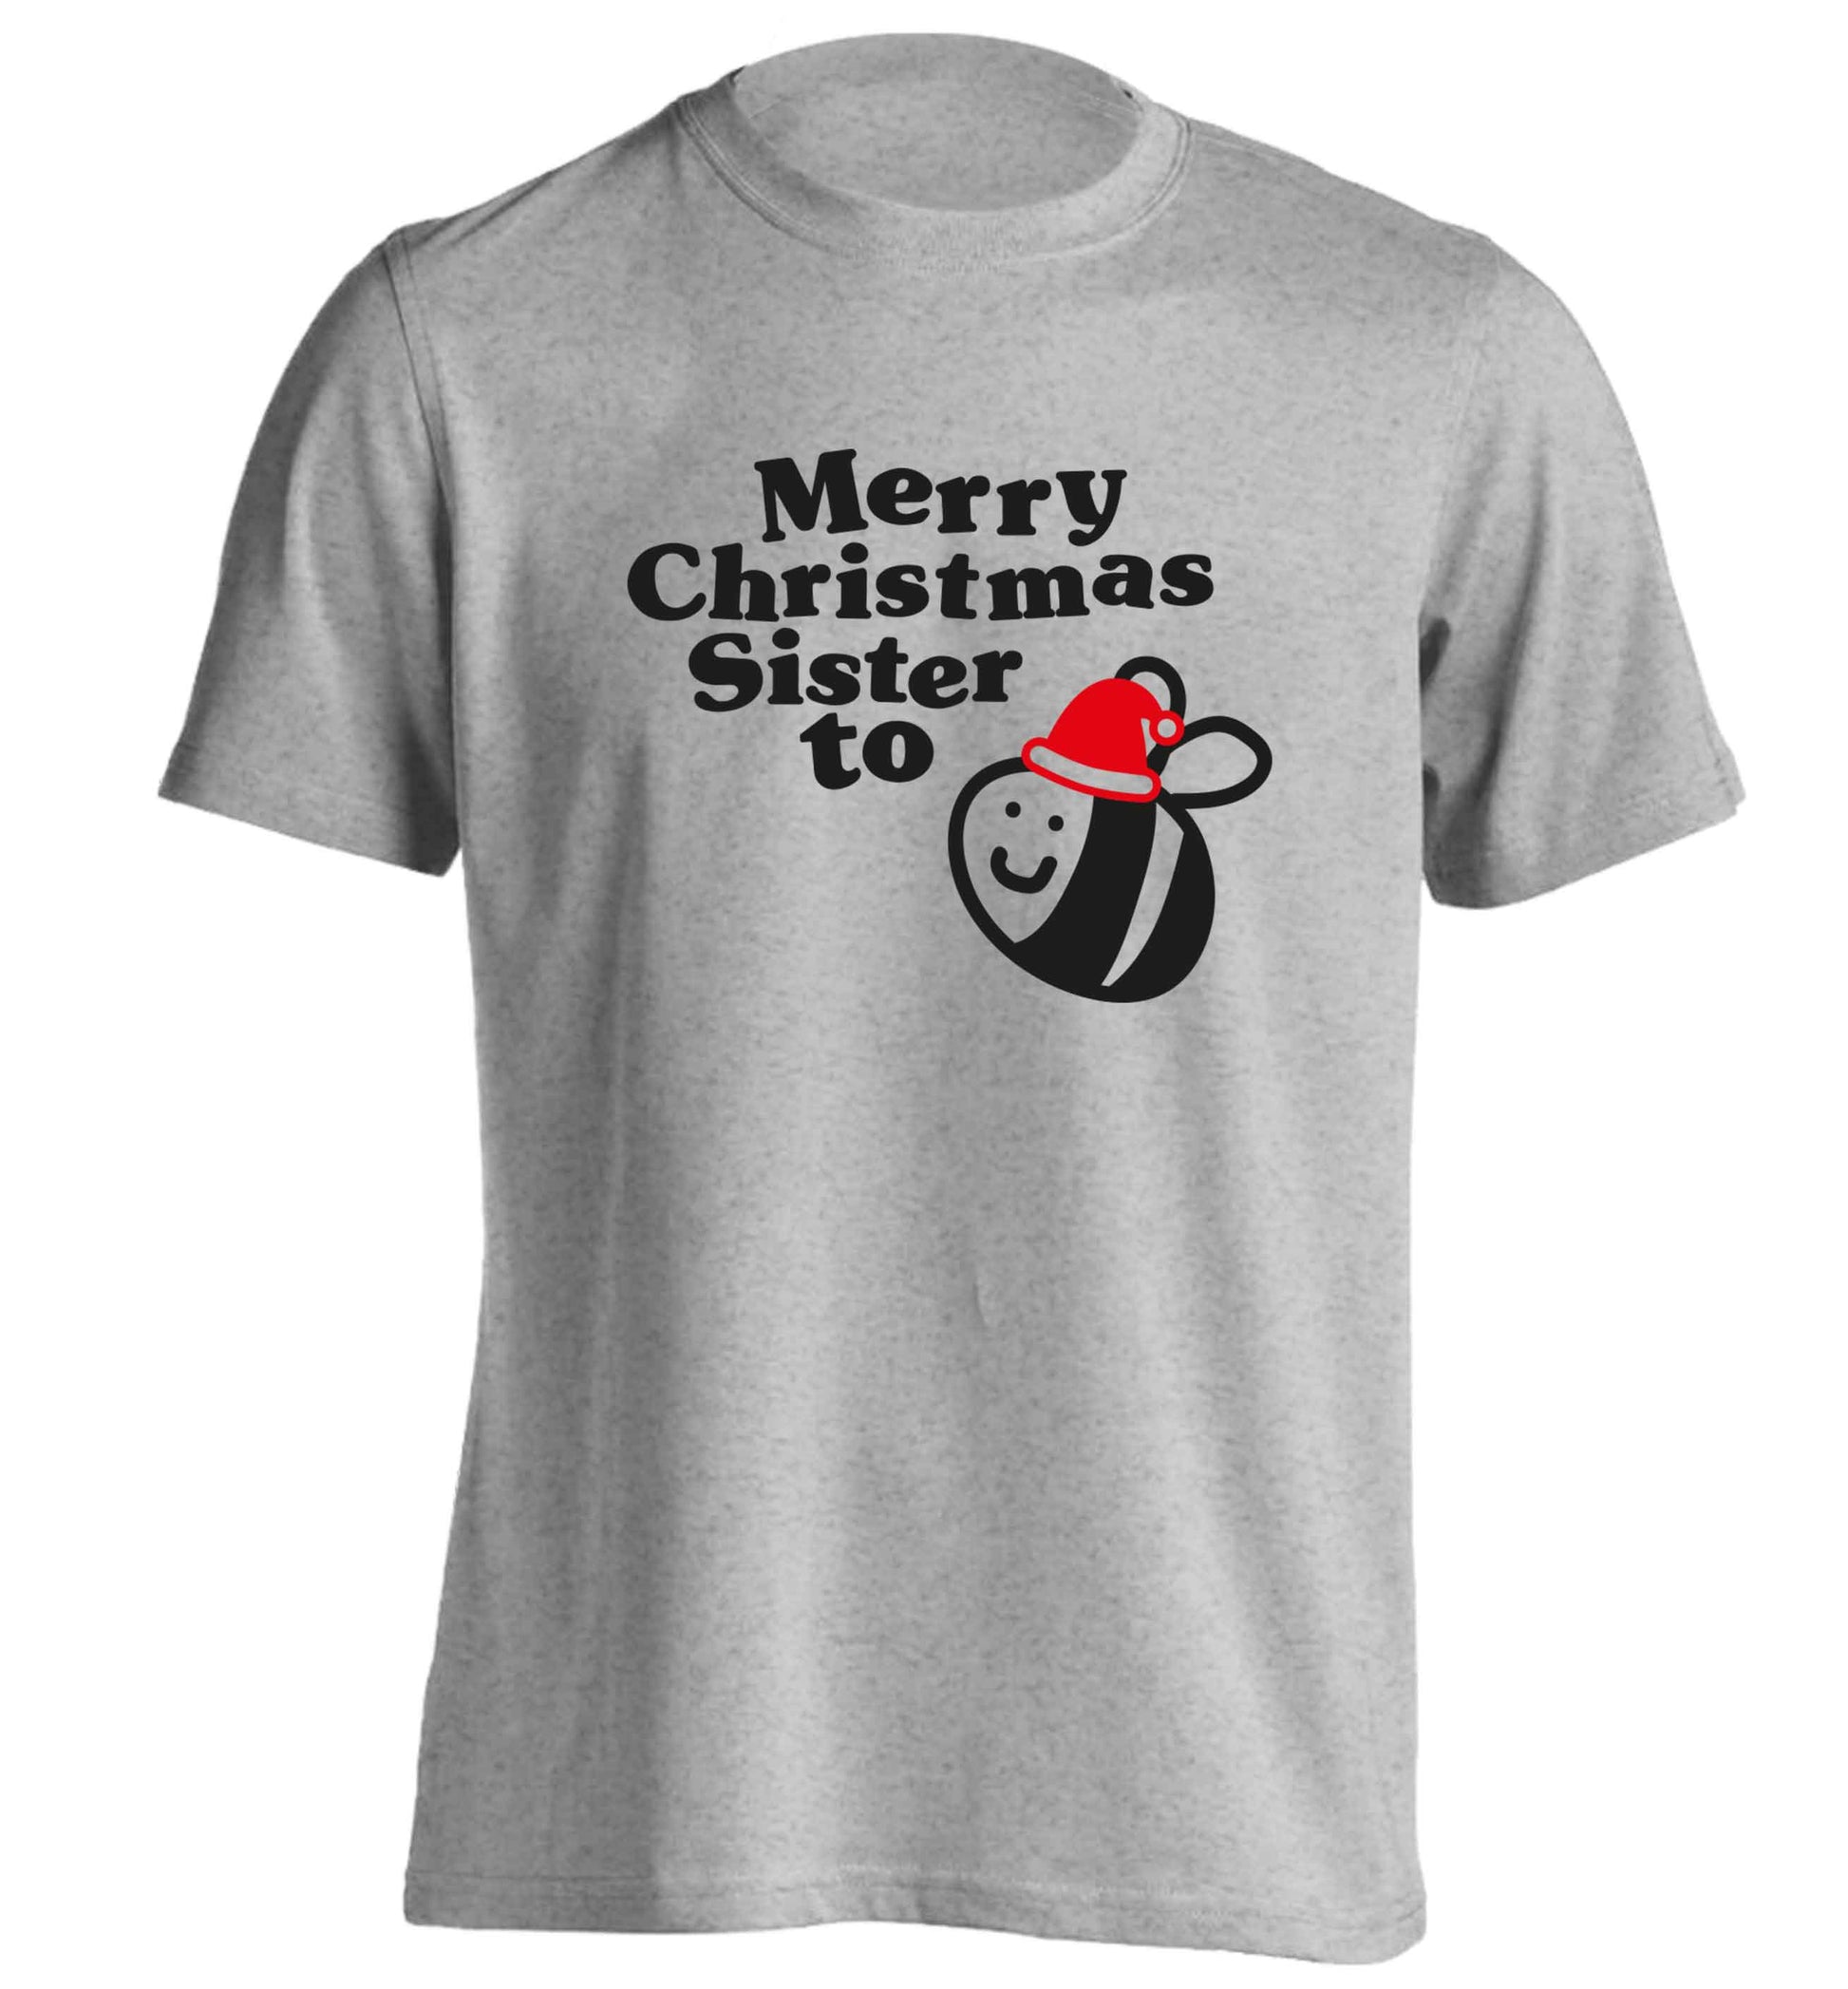 Merry Christmas sister to be adults unisex grey Tshirt 2XL